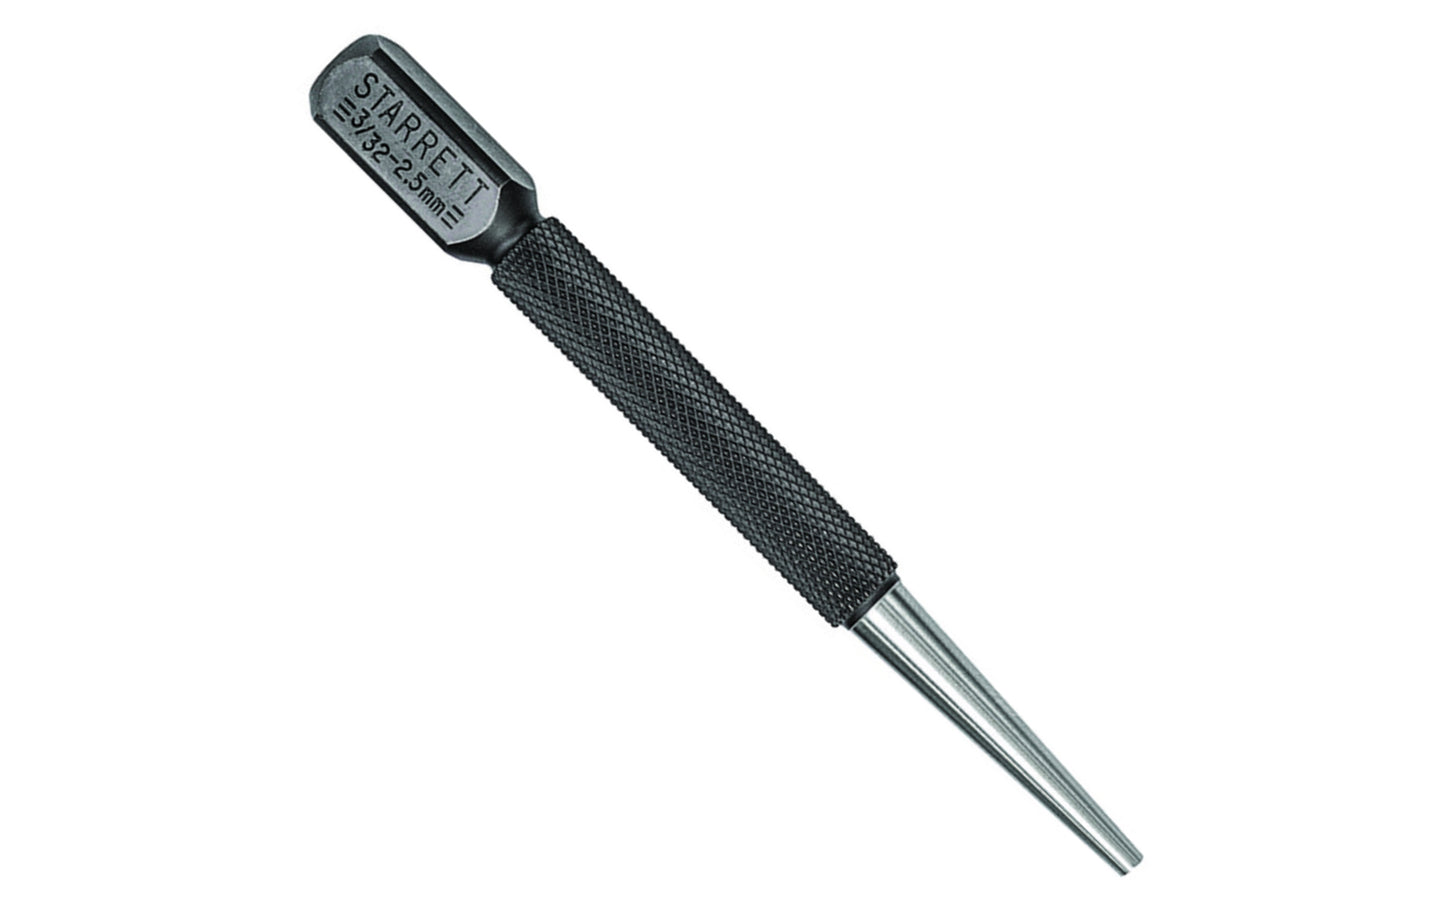 Model No. 800C. Hardened & Tempered. Starrett 800 Nail Set has a large, square head that provides a large striking surface and prevents the tool from rolling. 4" (100mm) Length, 3/32" (2.5mm) Punch Diameter. 496595303150.  Made in USA.